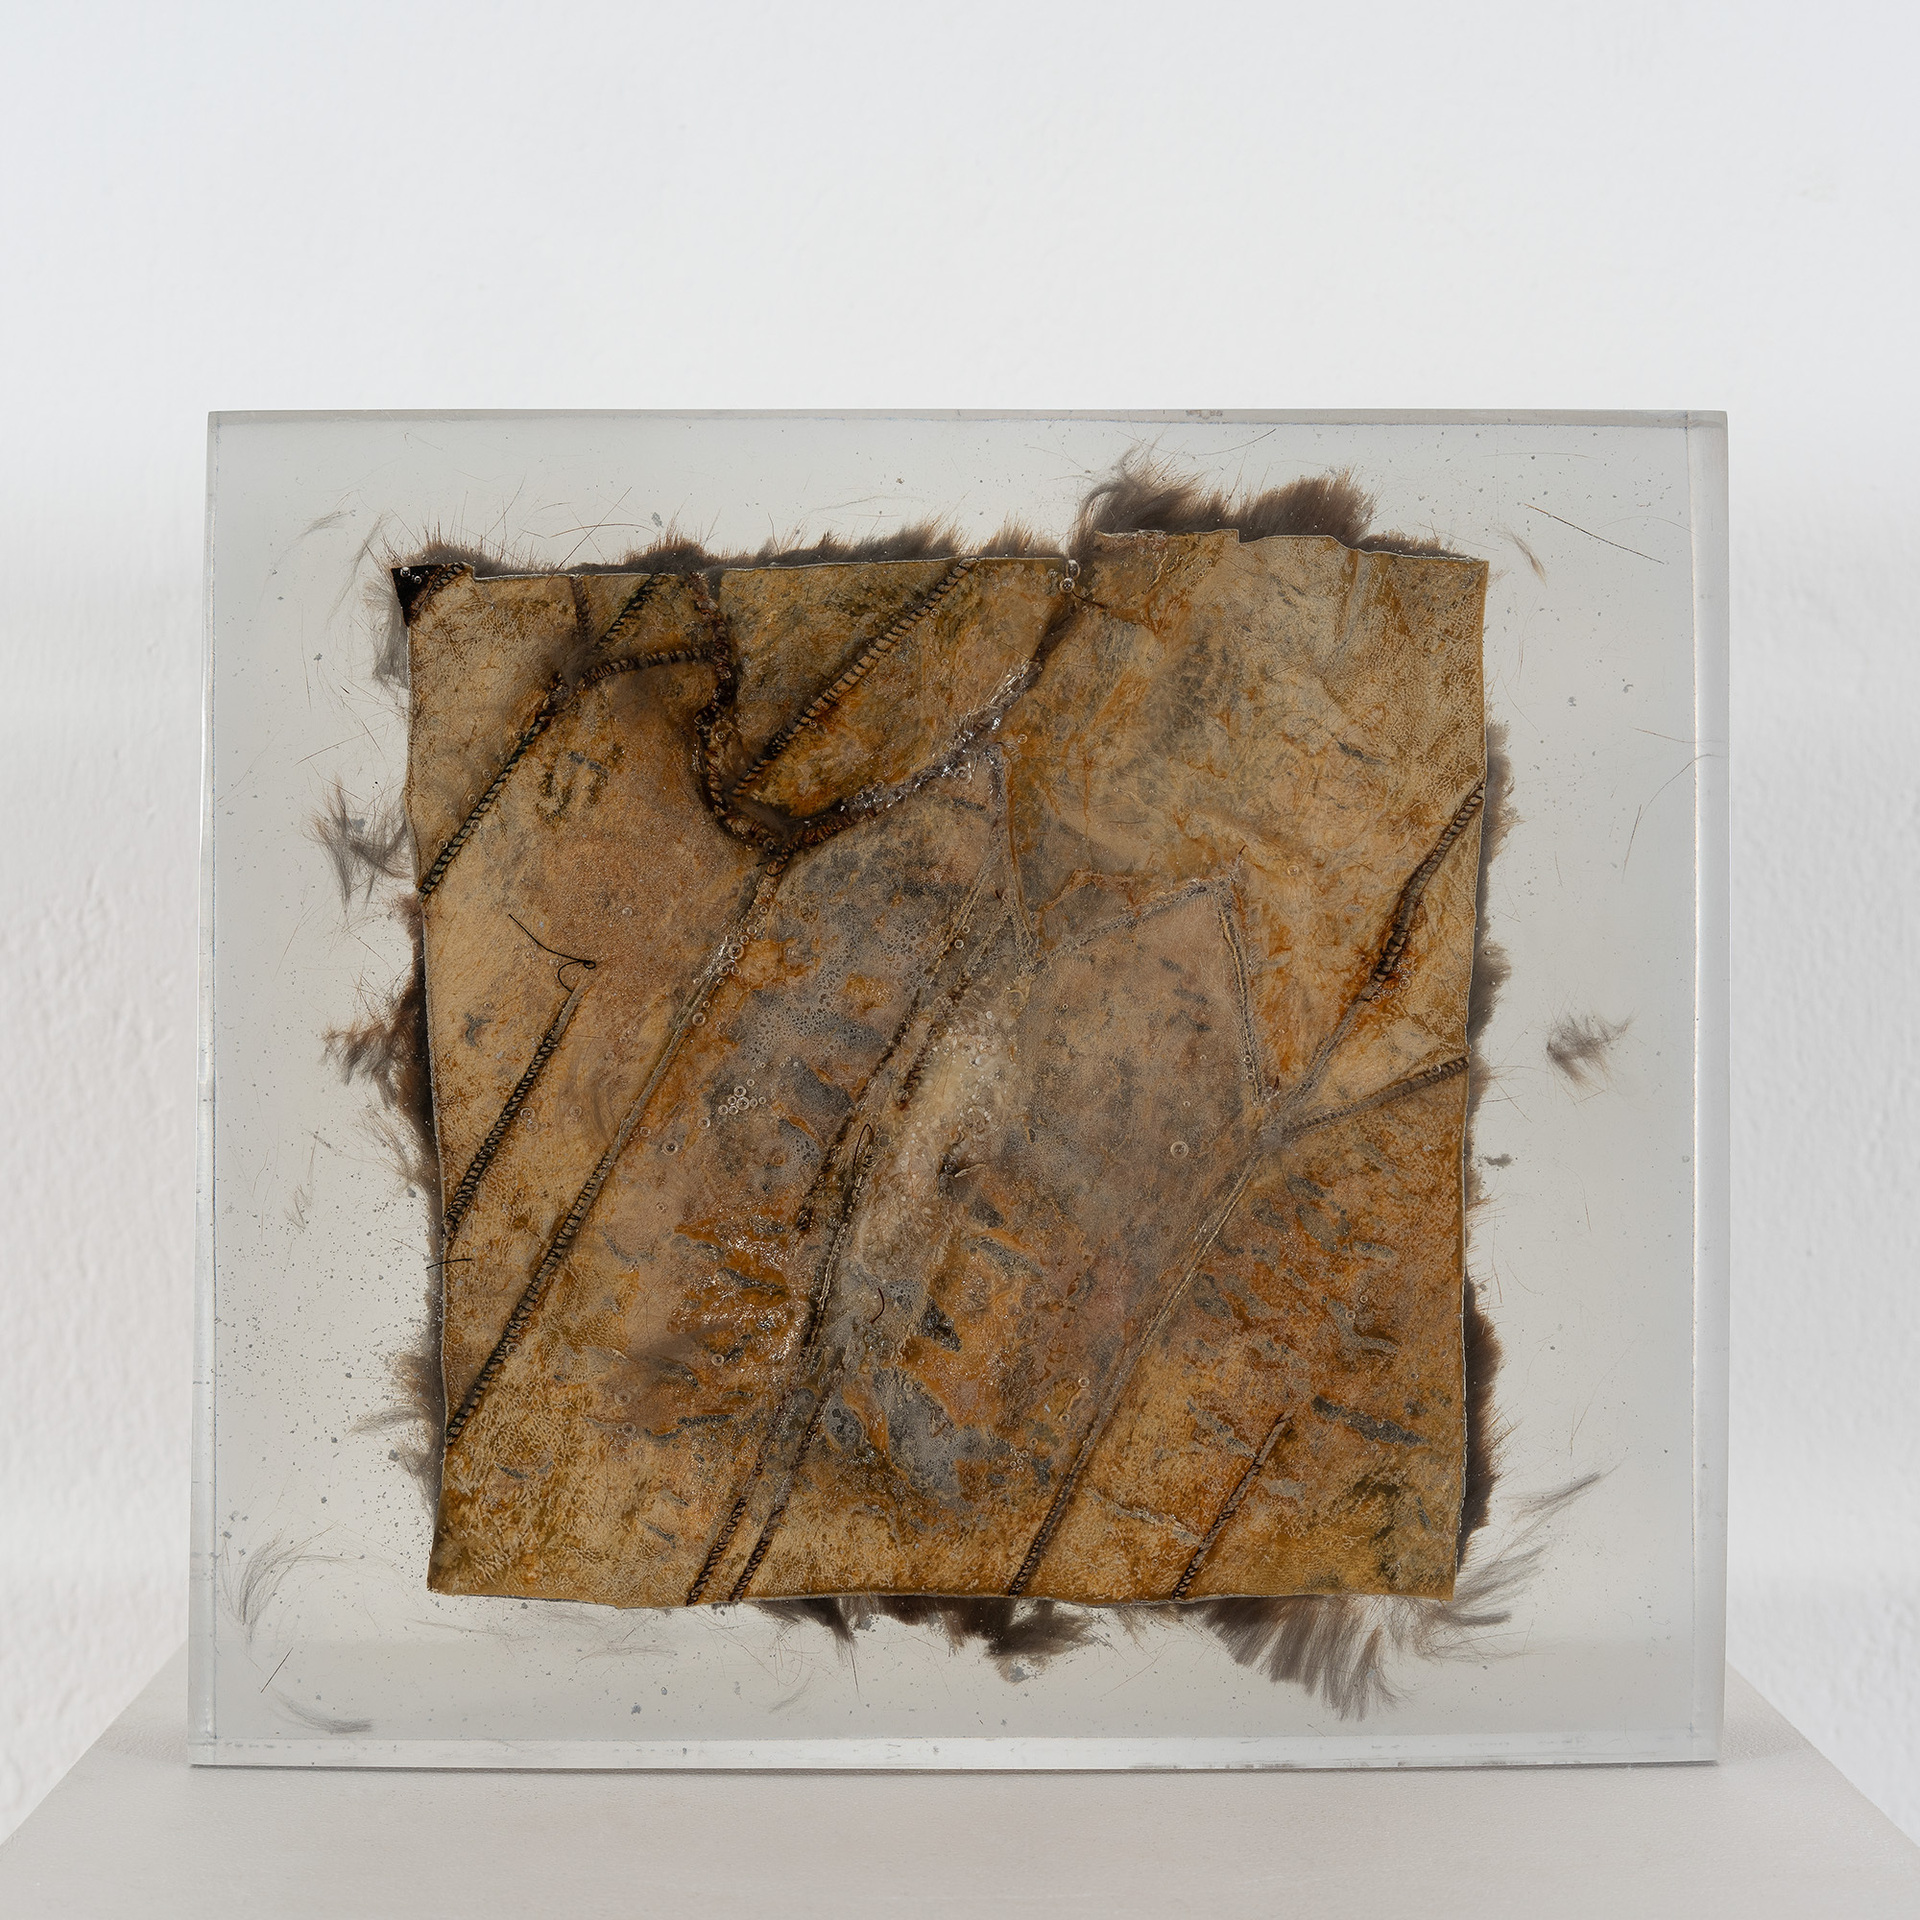 Rebekka Benzenberg, Stands for, 2021, Fur and bleaching agent in polyester resin, ca. 26 x 26 x 5 cm